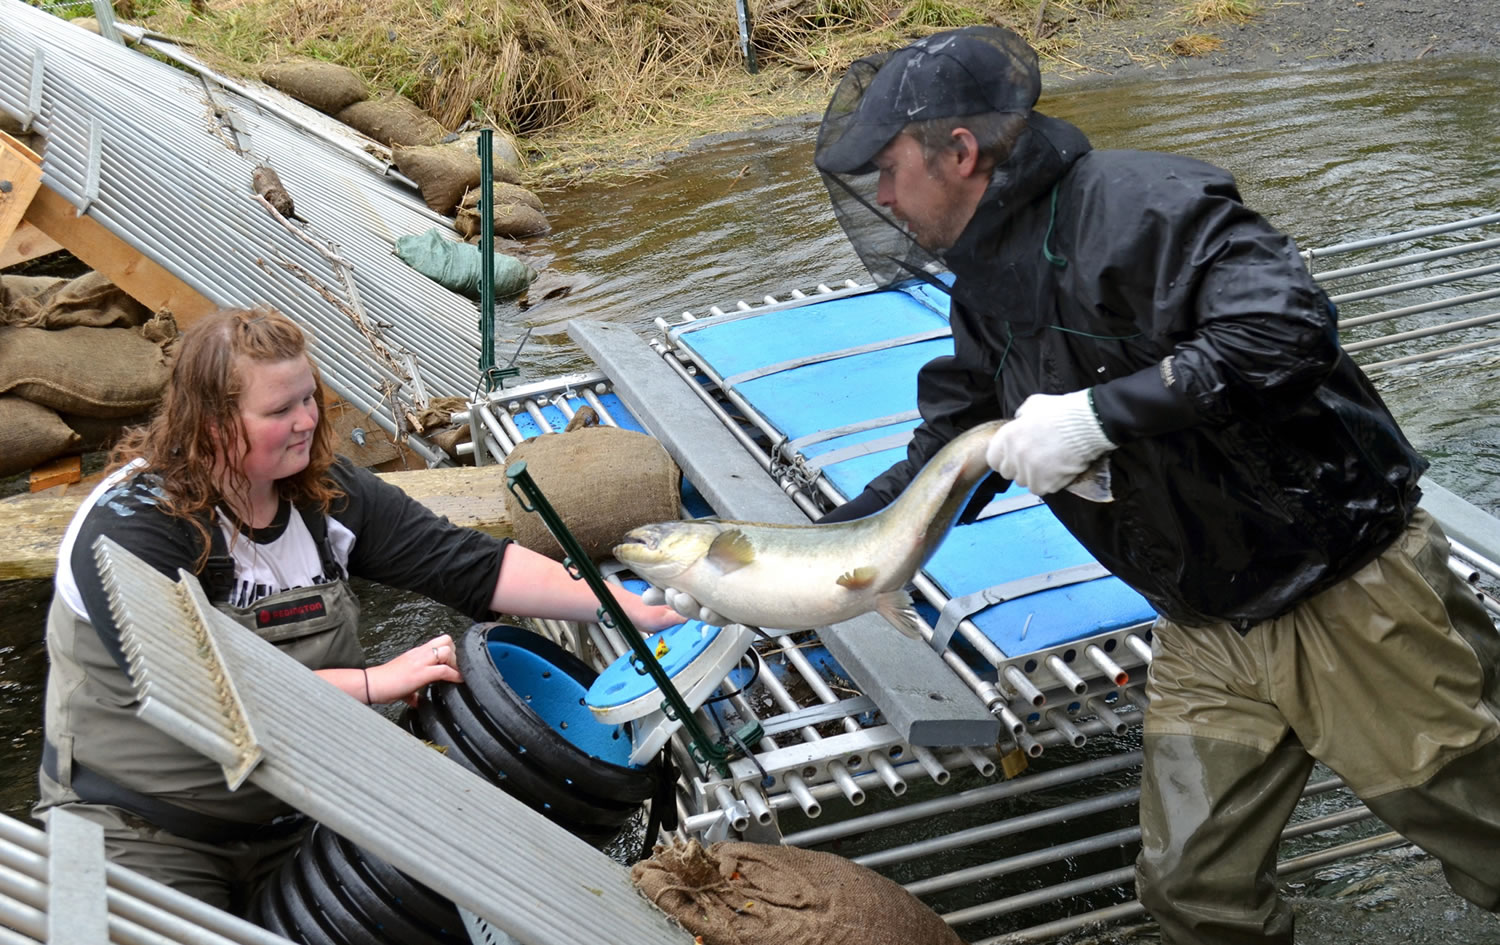 Alaska Department of Fish and Game biologists Kate Kimmel and Tyler Polum load a chinook salmon into a container on Monashka Creek in Kodiak, Alaska, in July.